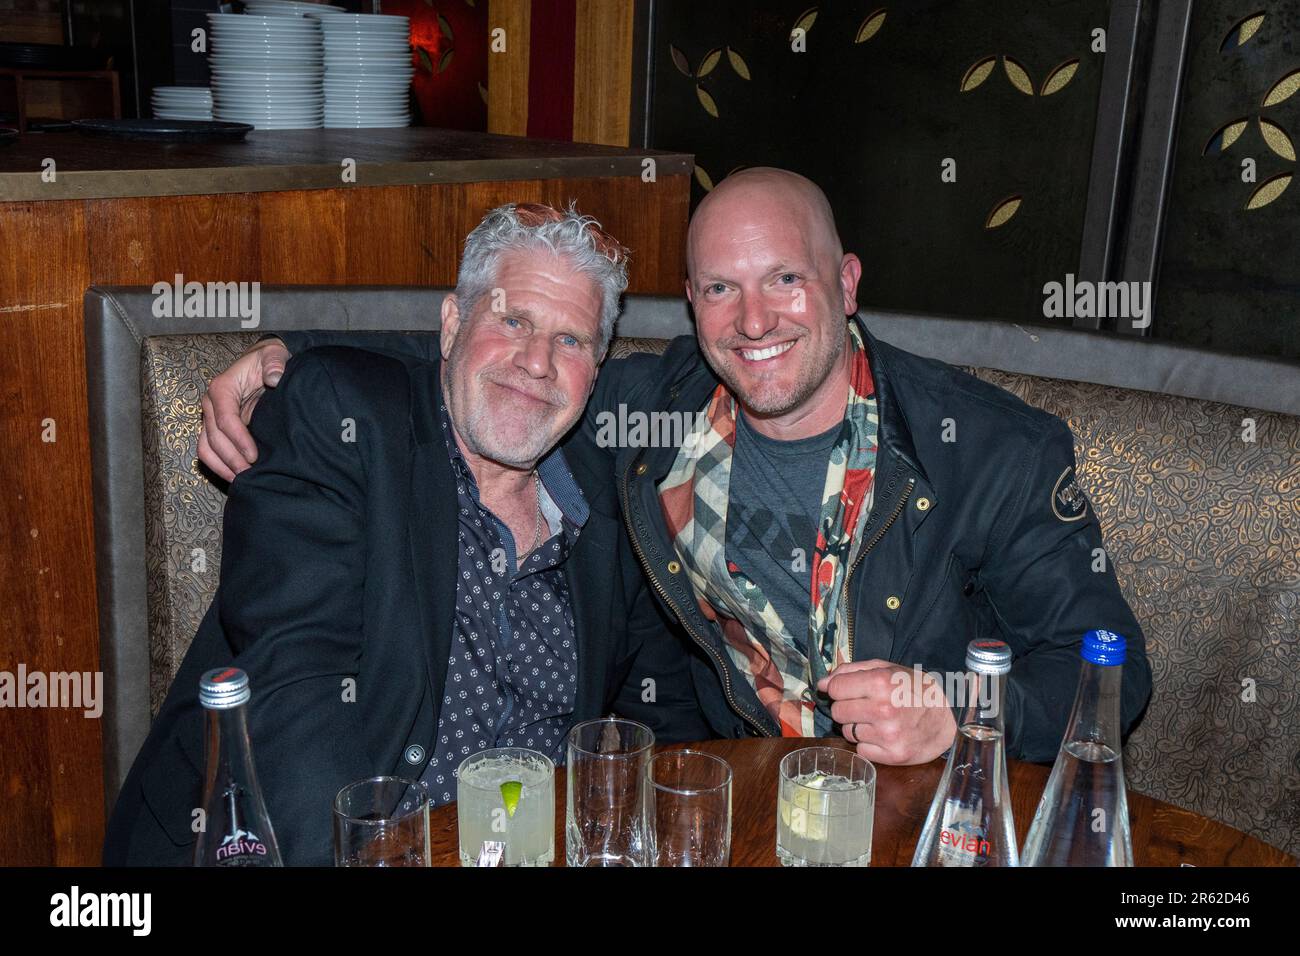 Transformers The Rise Of The Beasts New York City Red Carpet and Premiere at the Kings Theater in Brooklyn Afterparty at Tao Downtown - Ron Perlman an Stock Photo